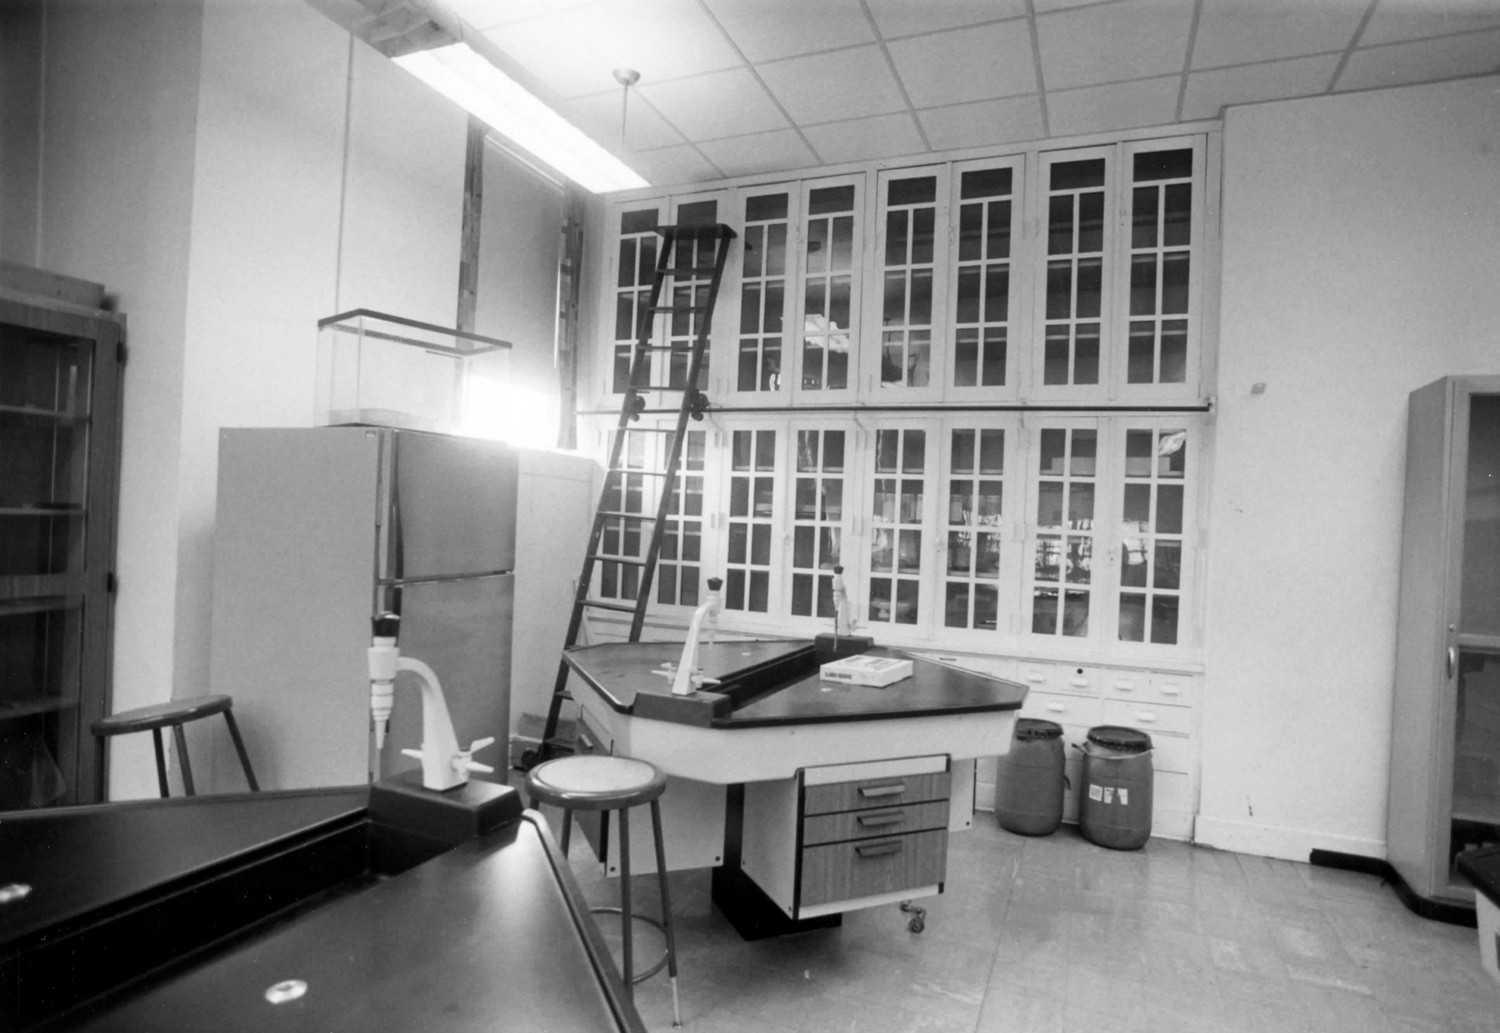 Ralph Waldo Emerson School, Gary Indiana New biology lab, 2nd floor, showing built-in cabinets made by students (1993)